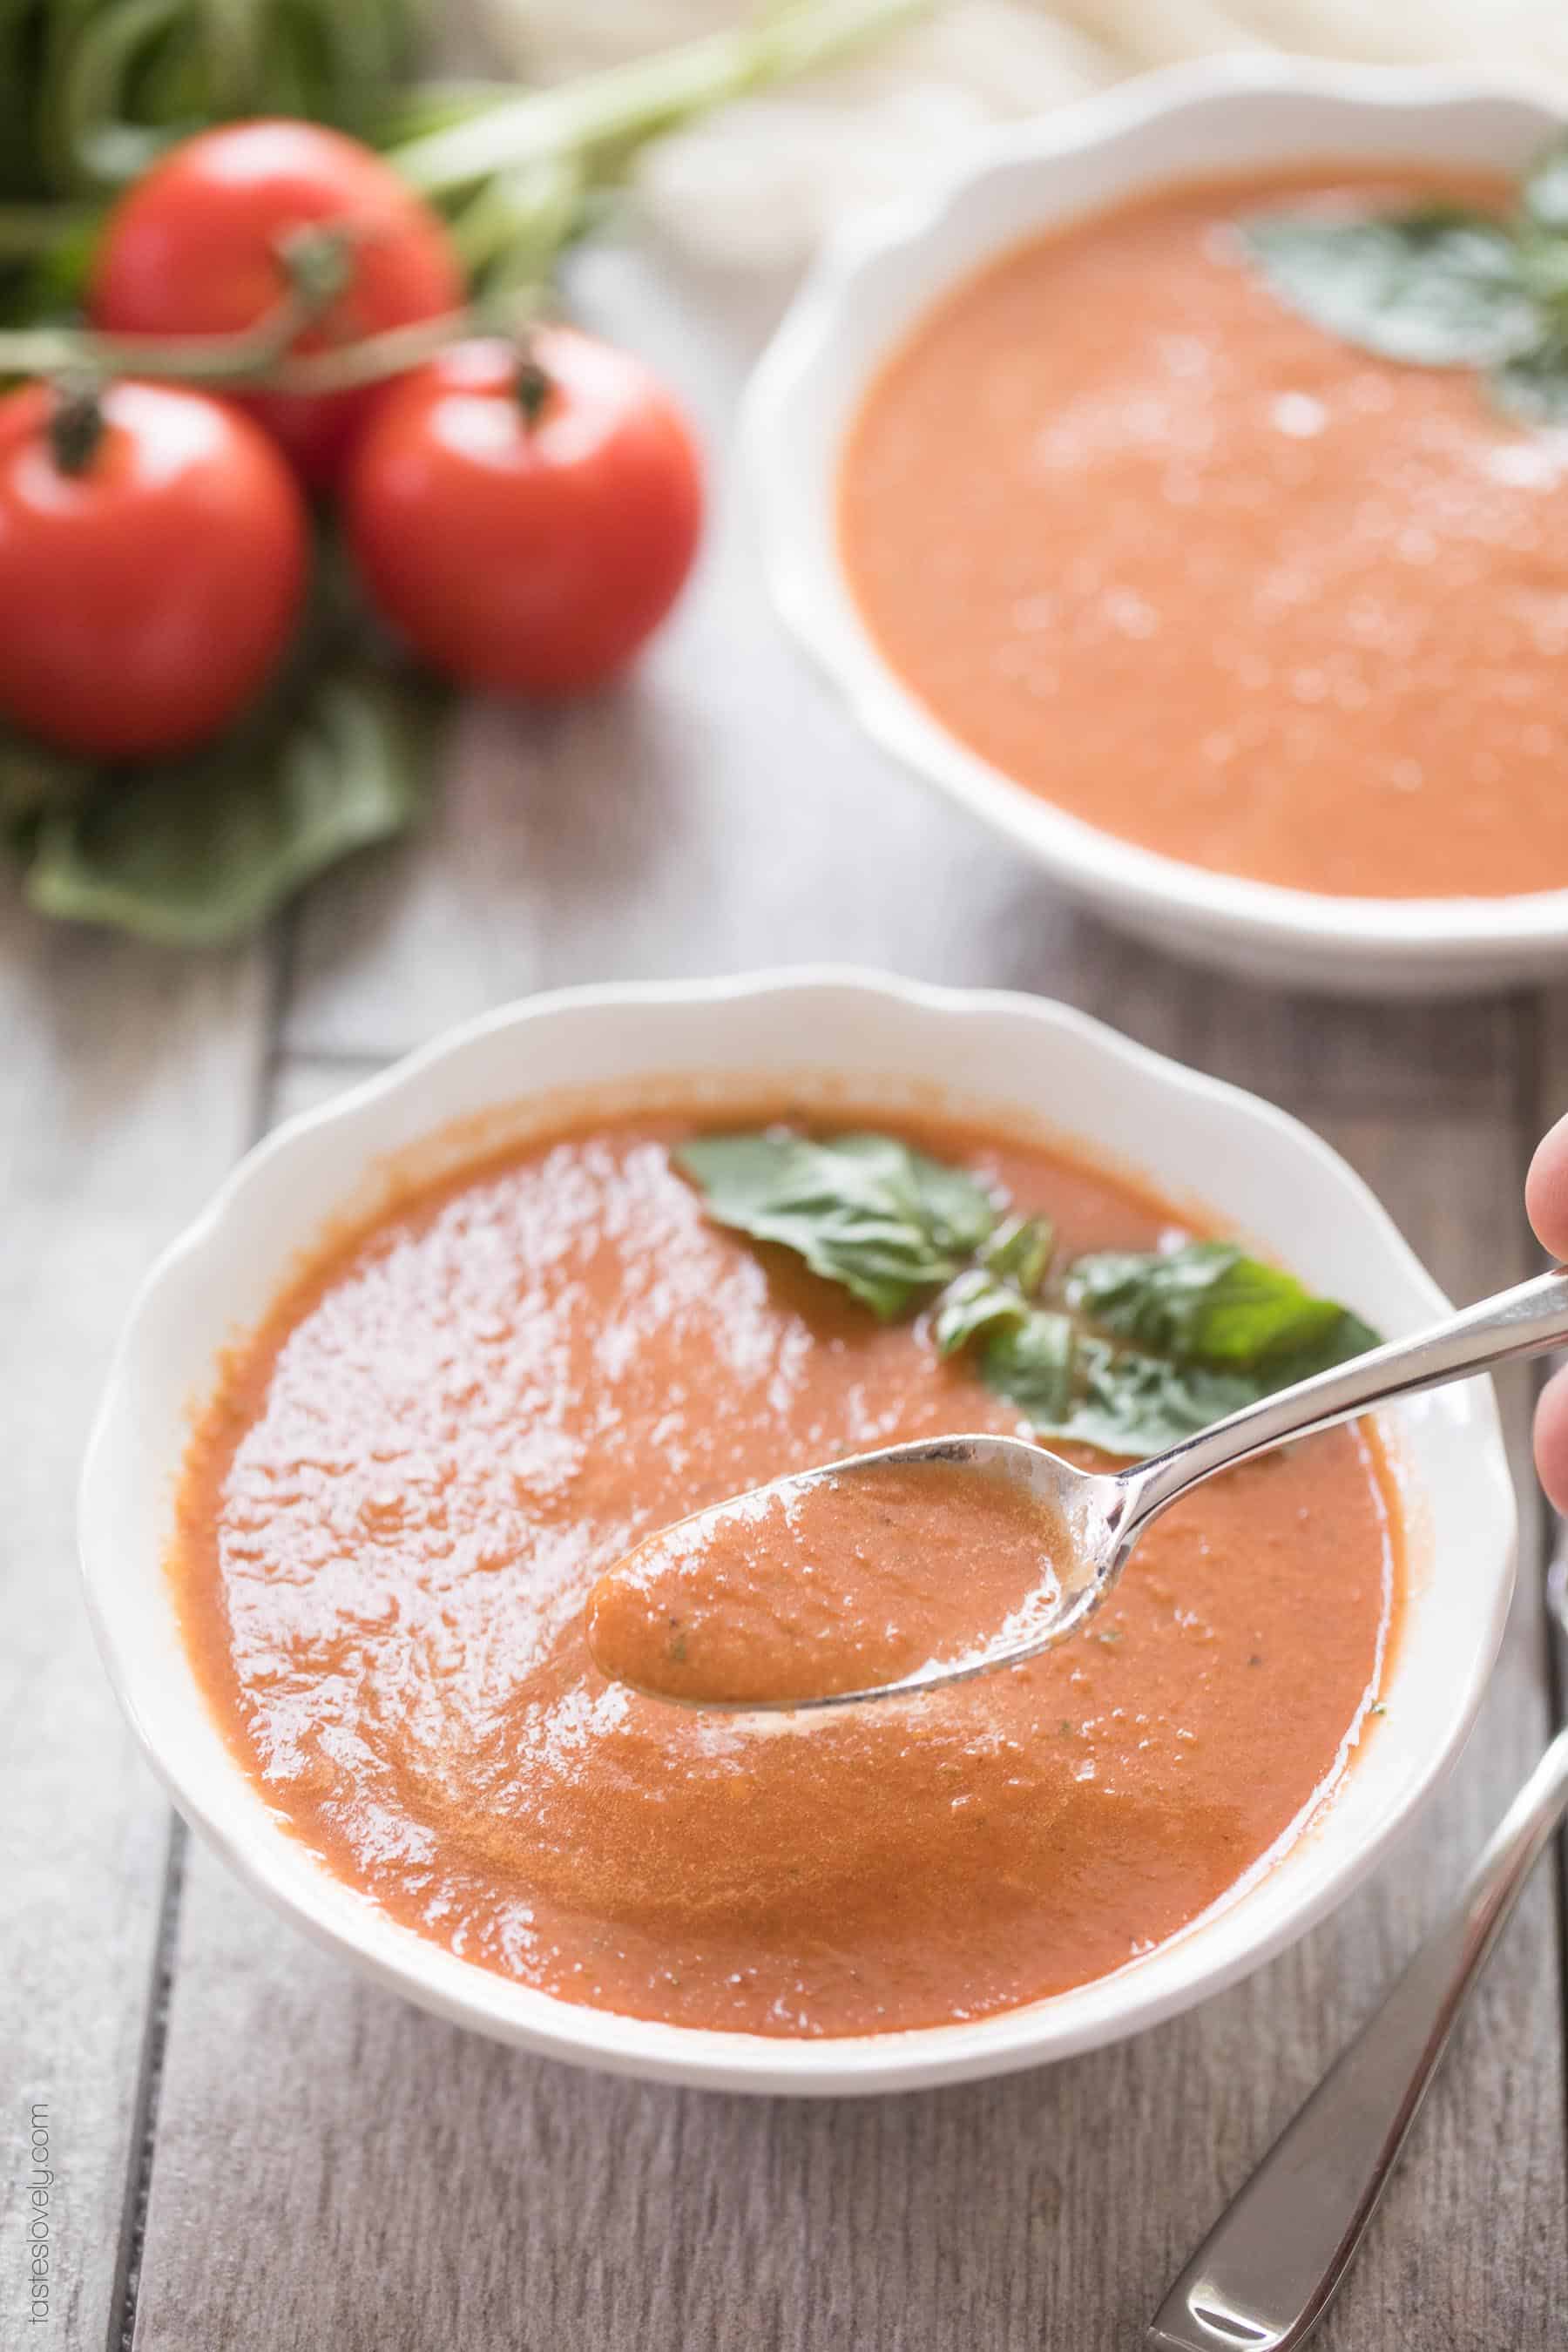 Paleo & Whole30 Tomato Basil Soup - made with canned tomatoes and in the blender, ready in 15 minutes! (dairy free, gluten free, sugar free)